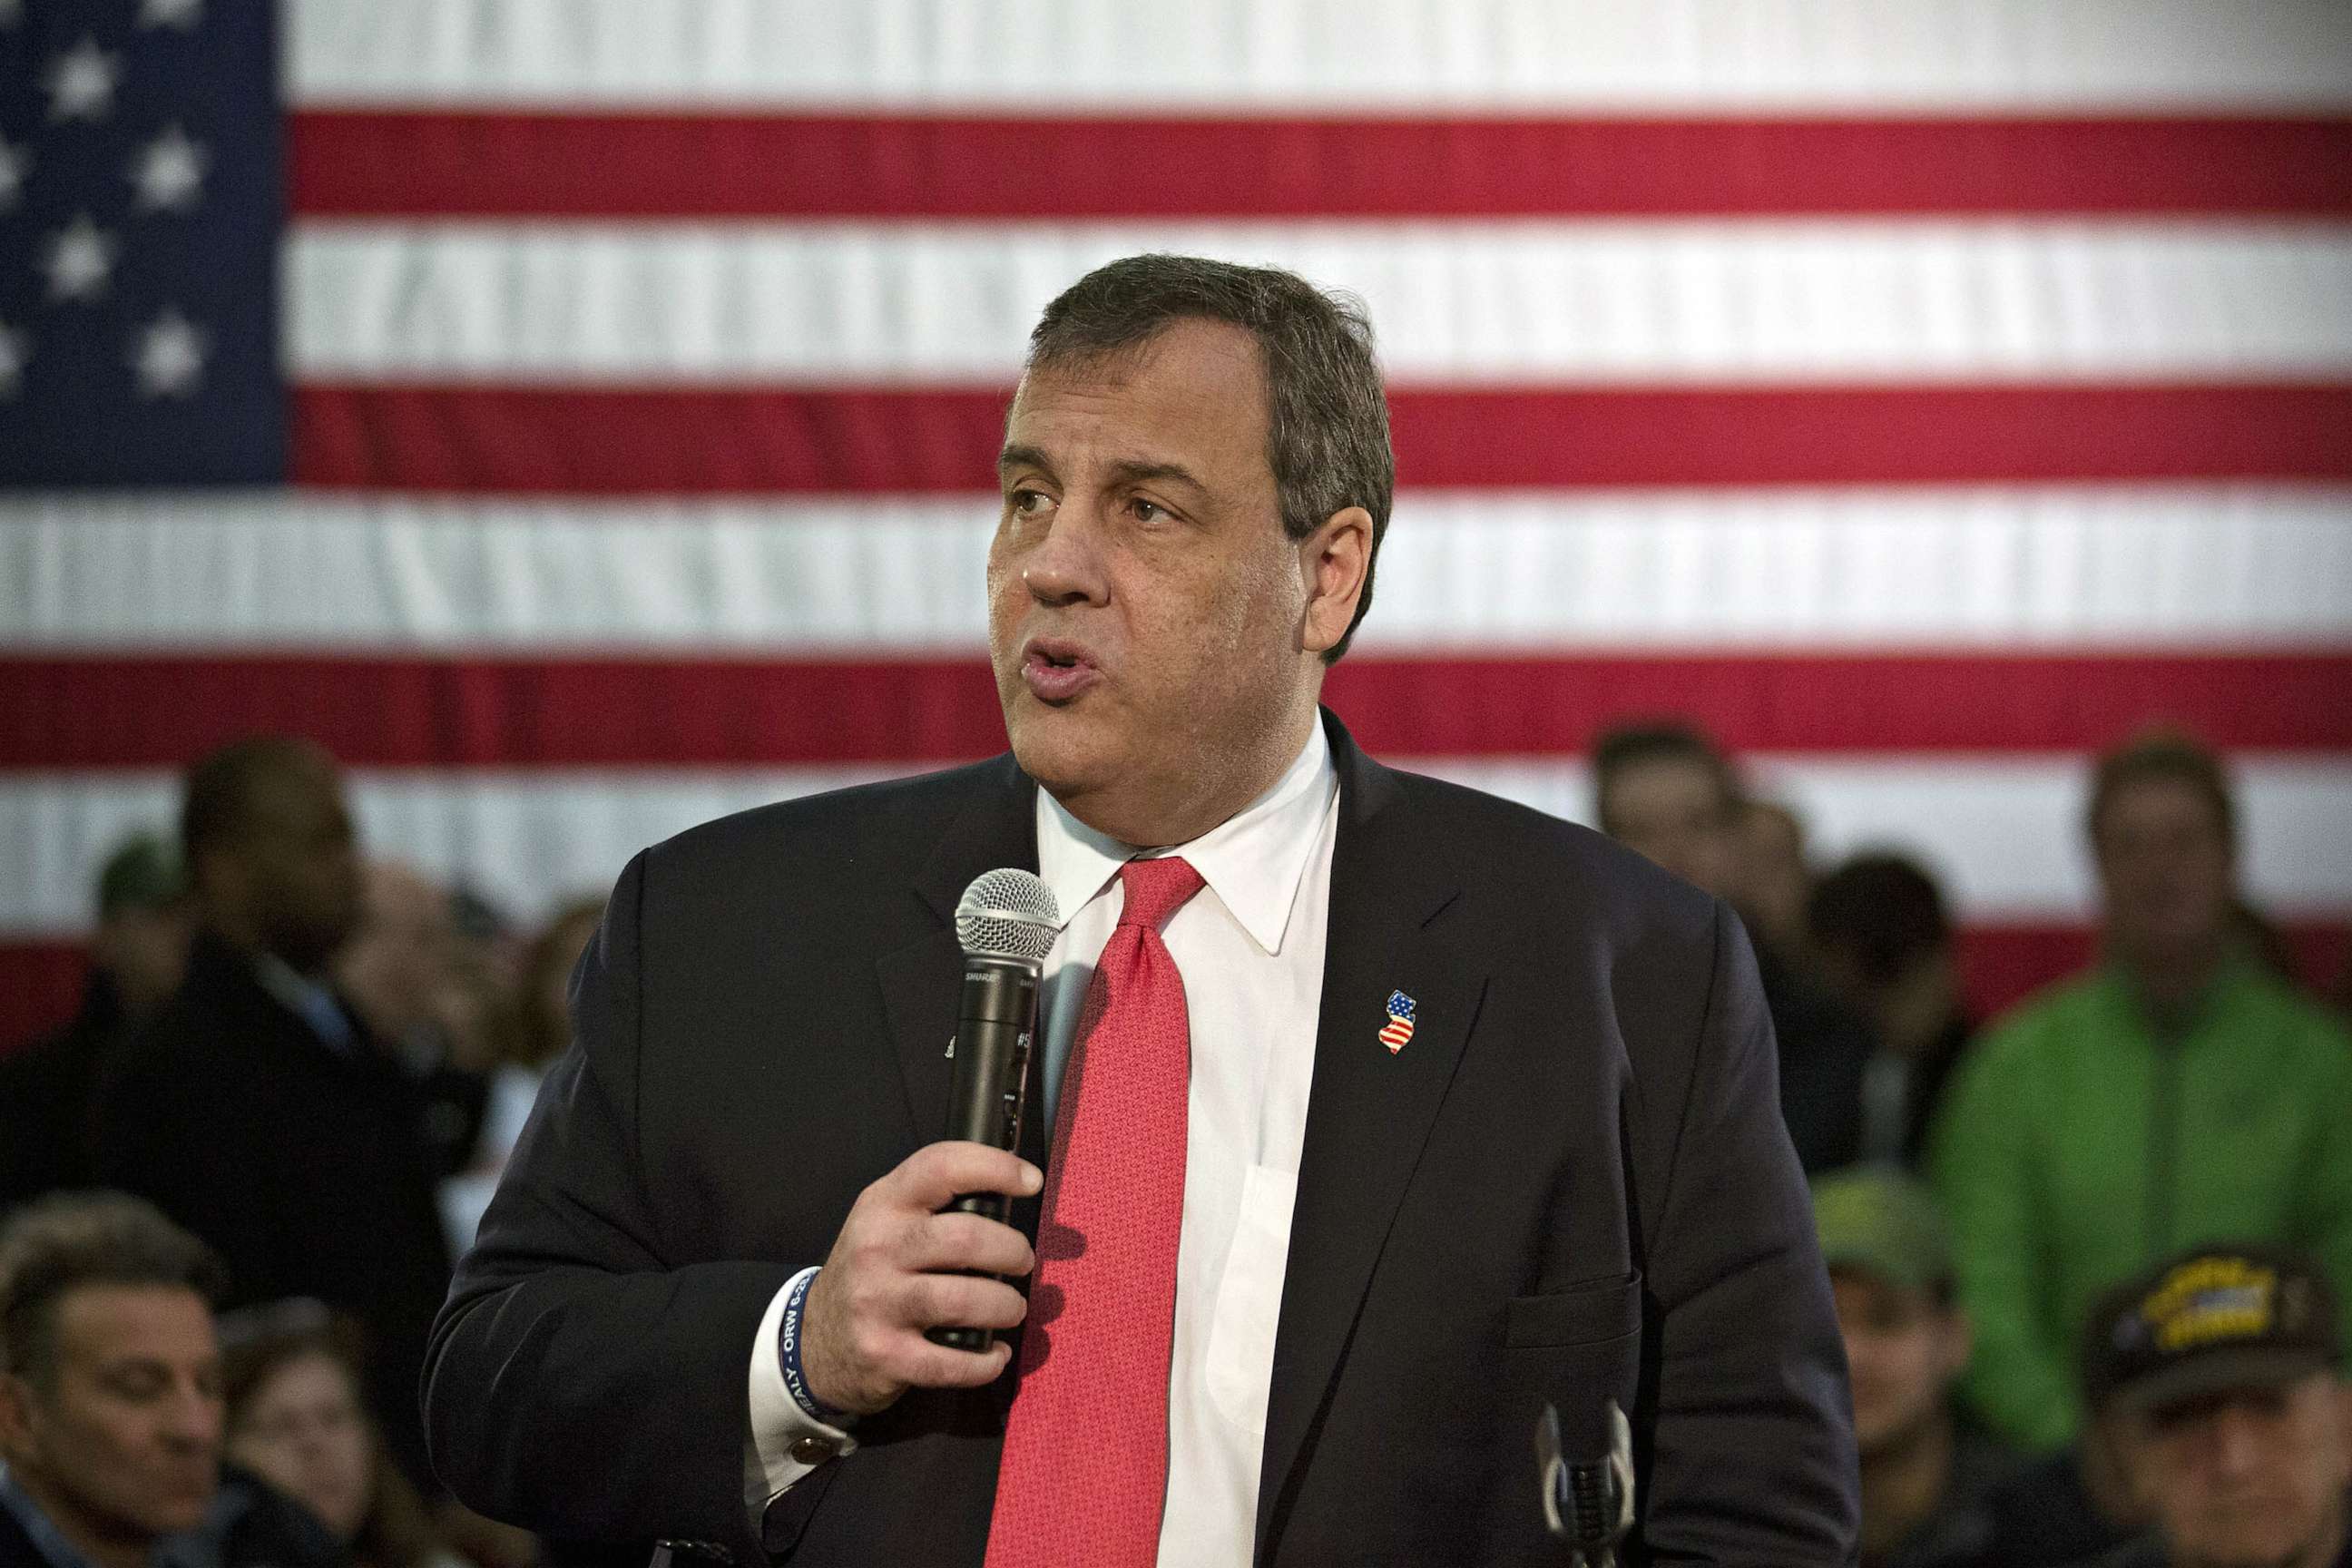 PHOTO: FILE - Chris Christie, governor of New Jersey and 2016 Republican presidential candidate, speaks during a town hall event at the Gilchrist Metal Co. in Hudson, New Hampshire, Feb. 8, 2016.